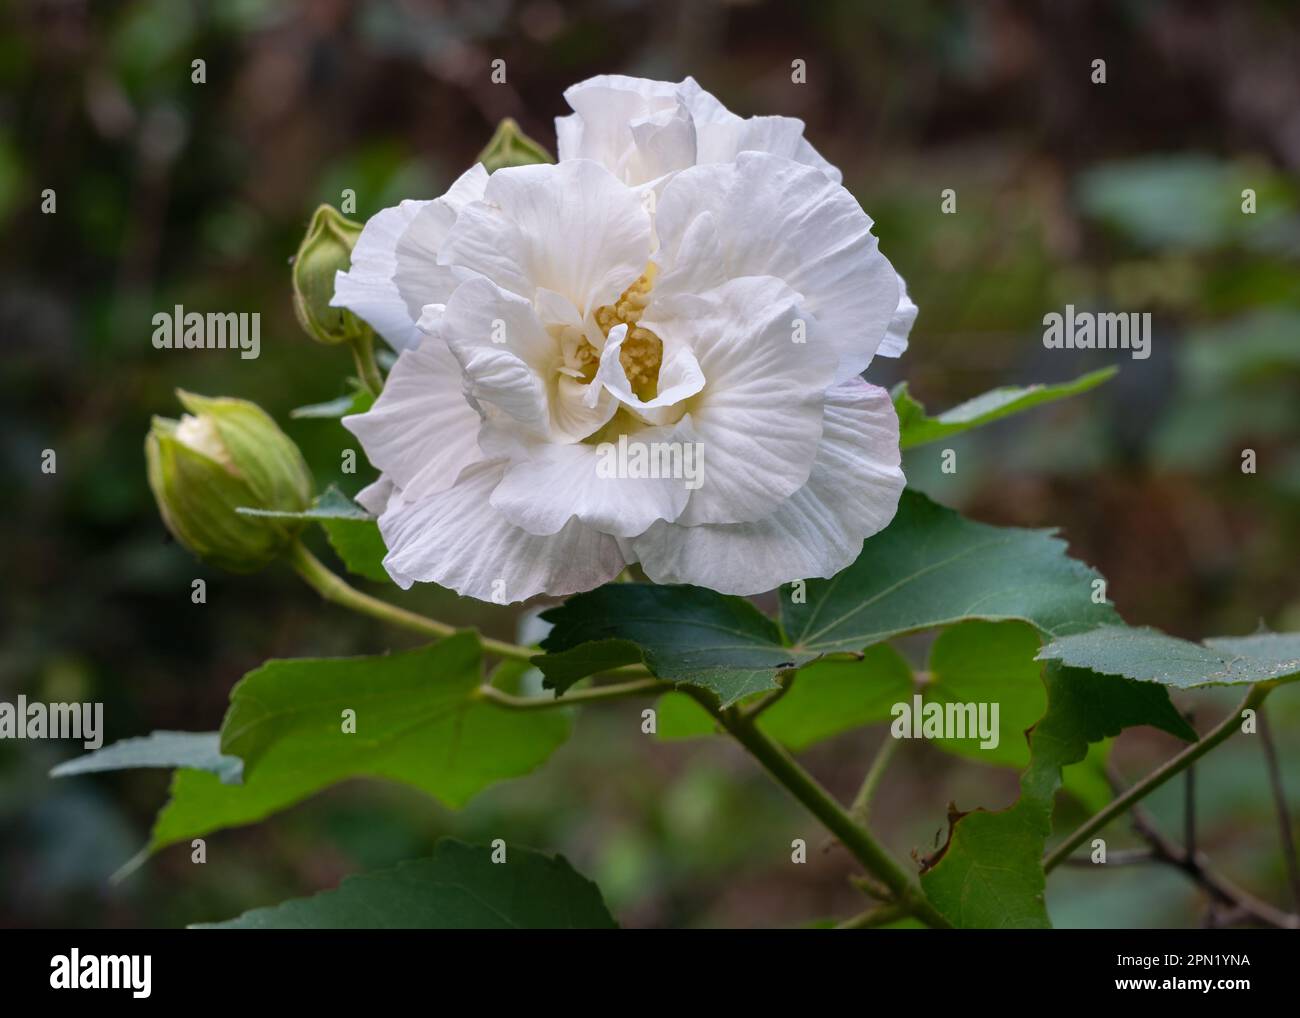 Closeup view of beautiful white hibiscus mutabilis aka Confederate rose or Dixie rosemallow flower with foliage and buds outdoors in tropical garden Stock Photo